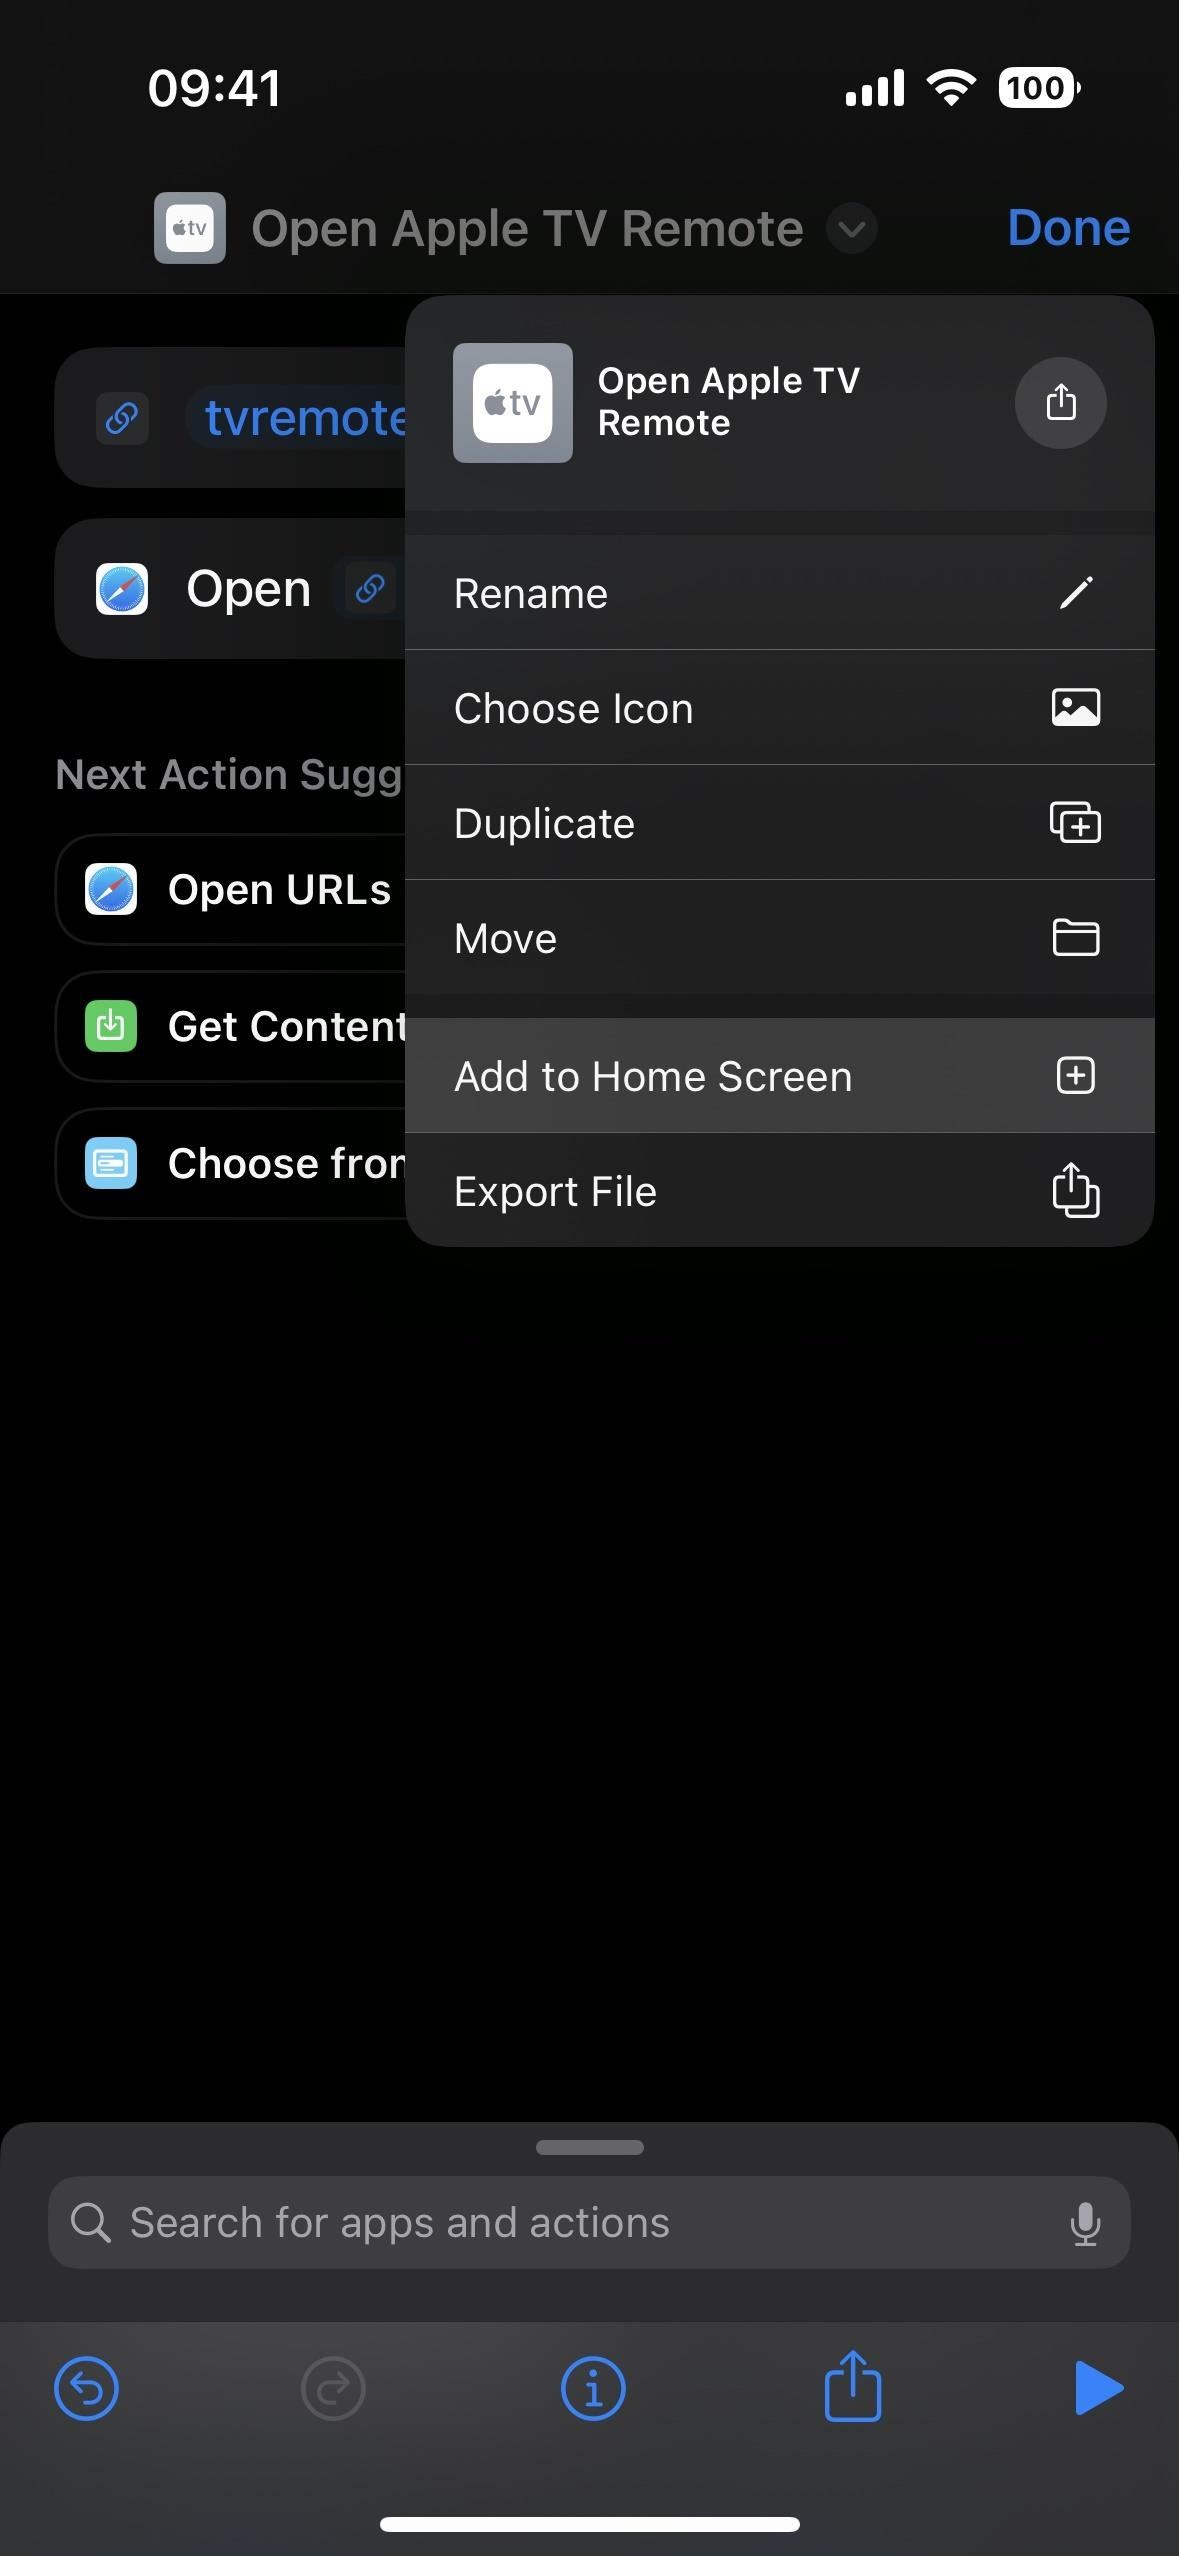 Unlock your iPhone's secret Apple TV Remote app for your home screen, app library, Siri and more—no Control Center needed